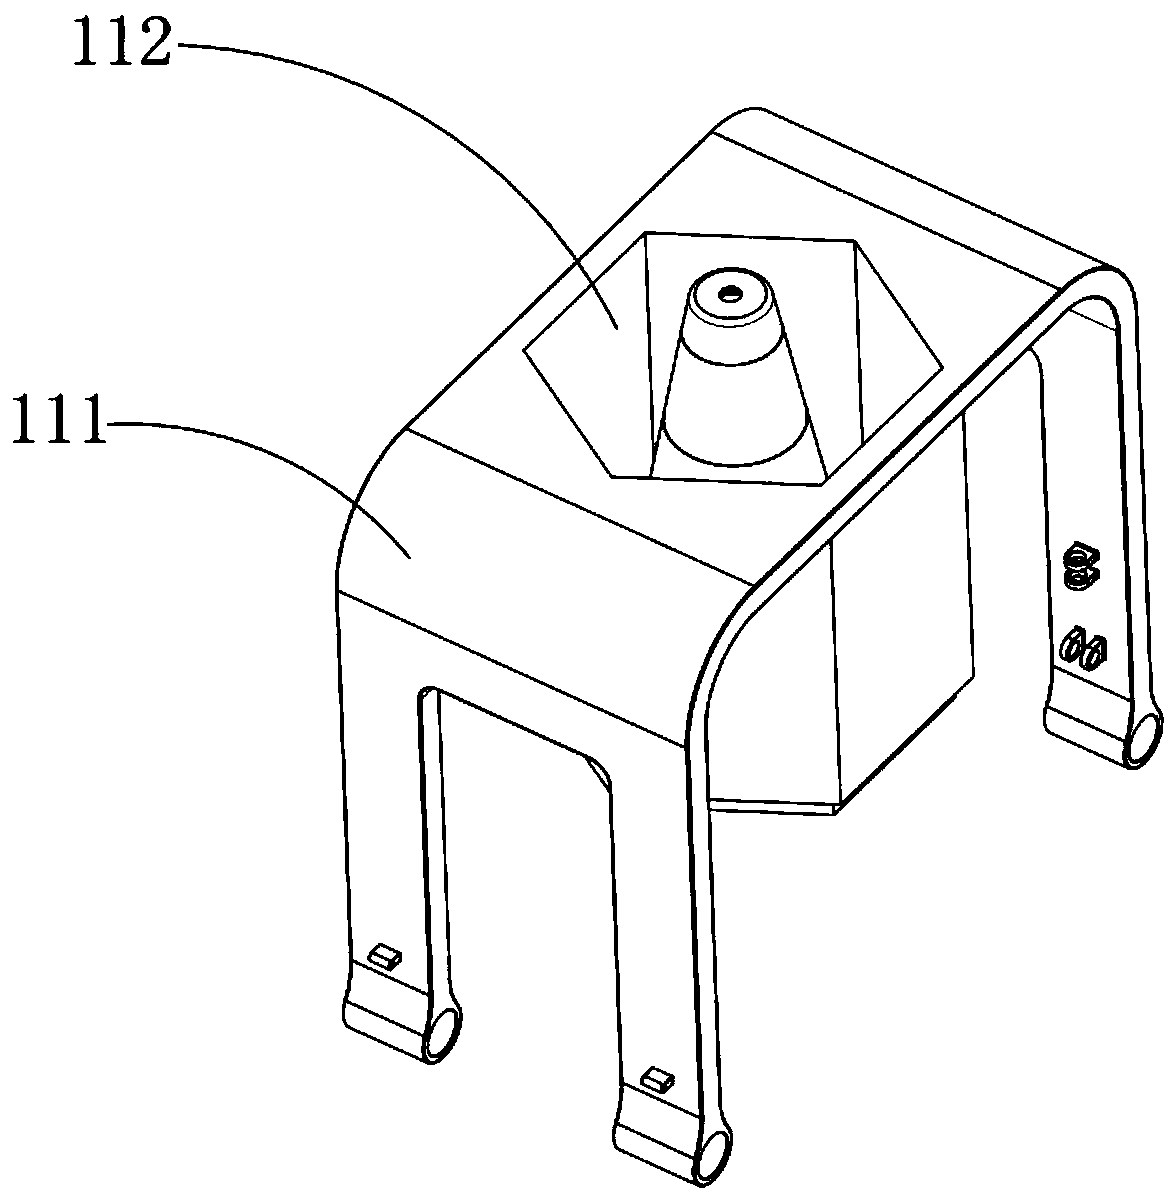 Road cone placement method capable of adjusting spacing